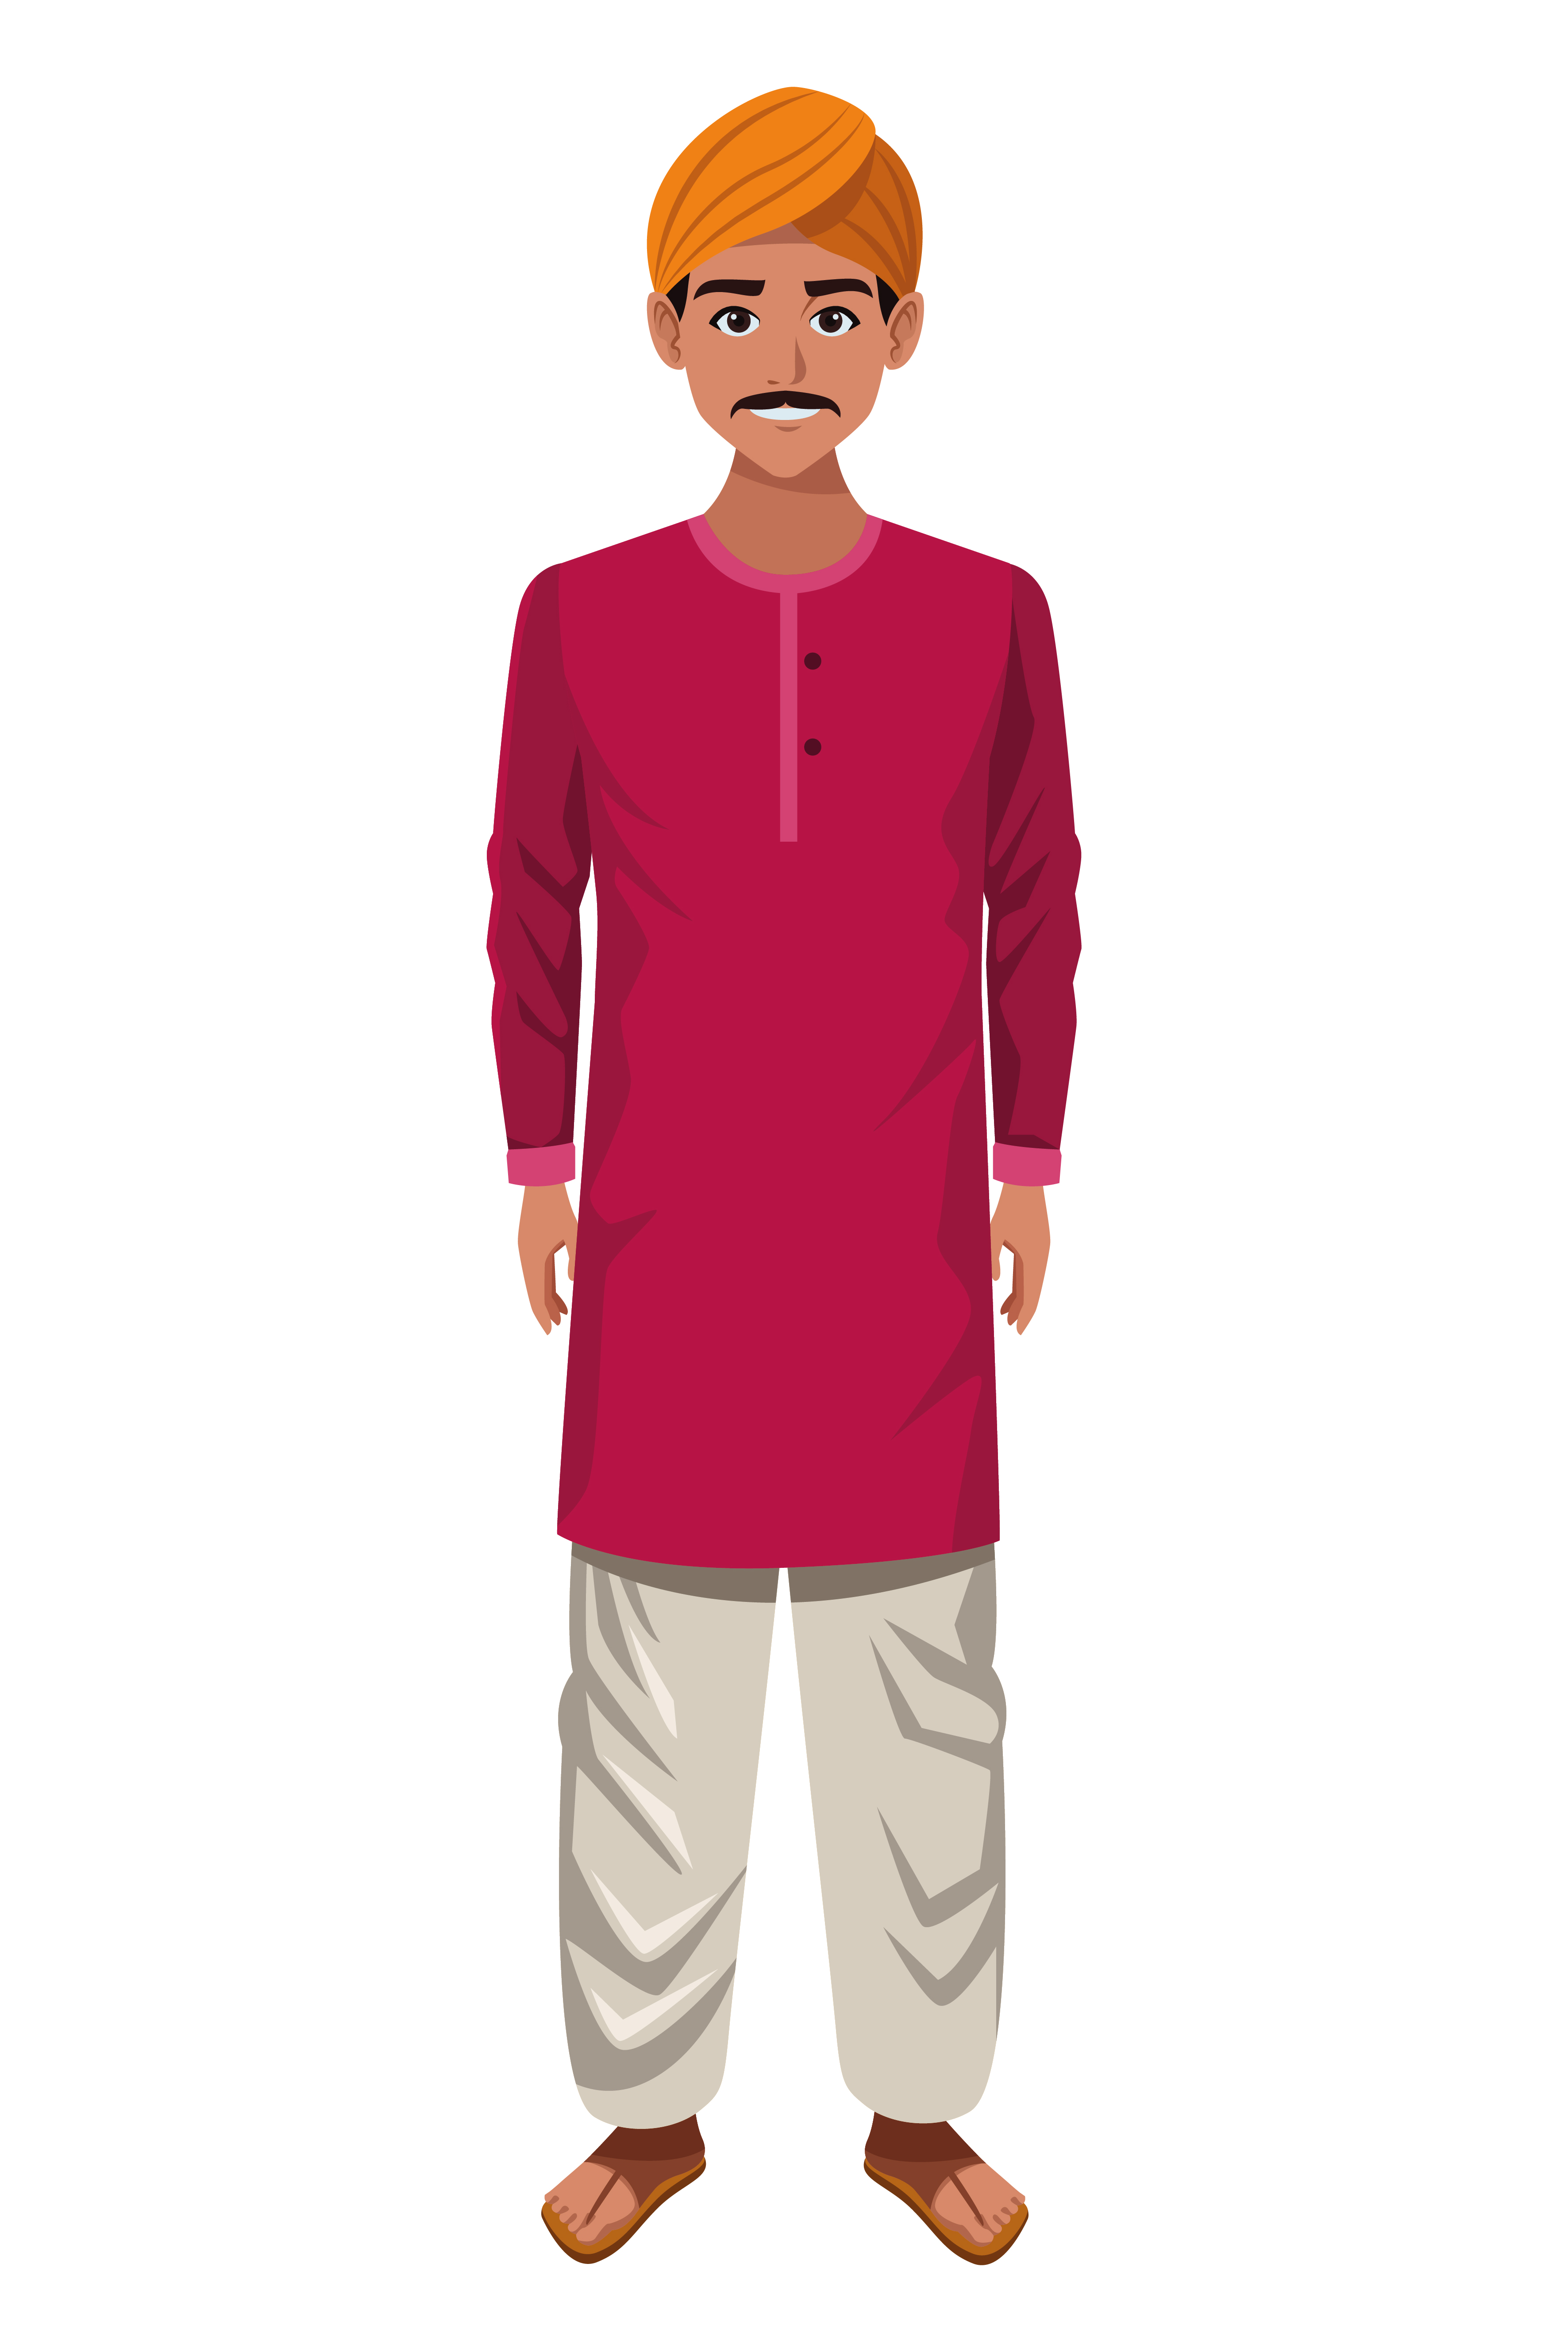 Indian Man Vector Art, Icons, and Graphics for Free Download